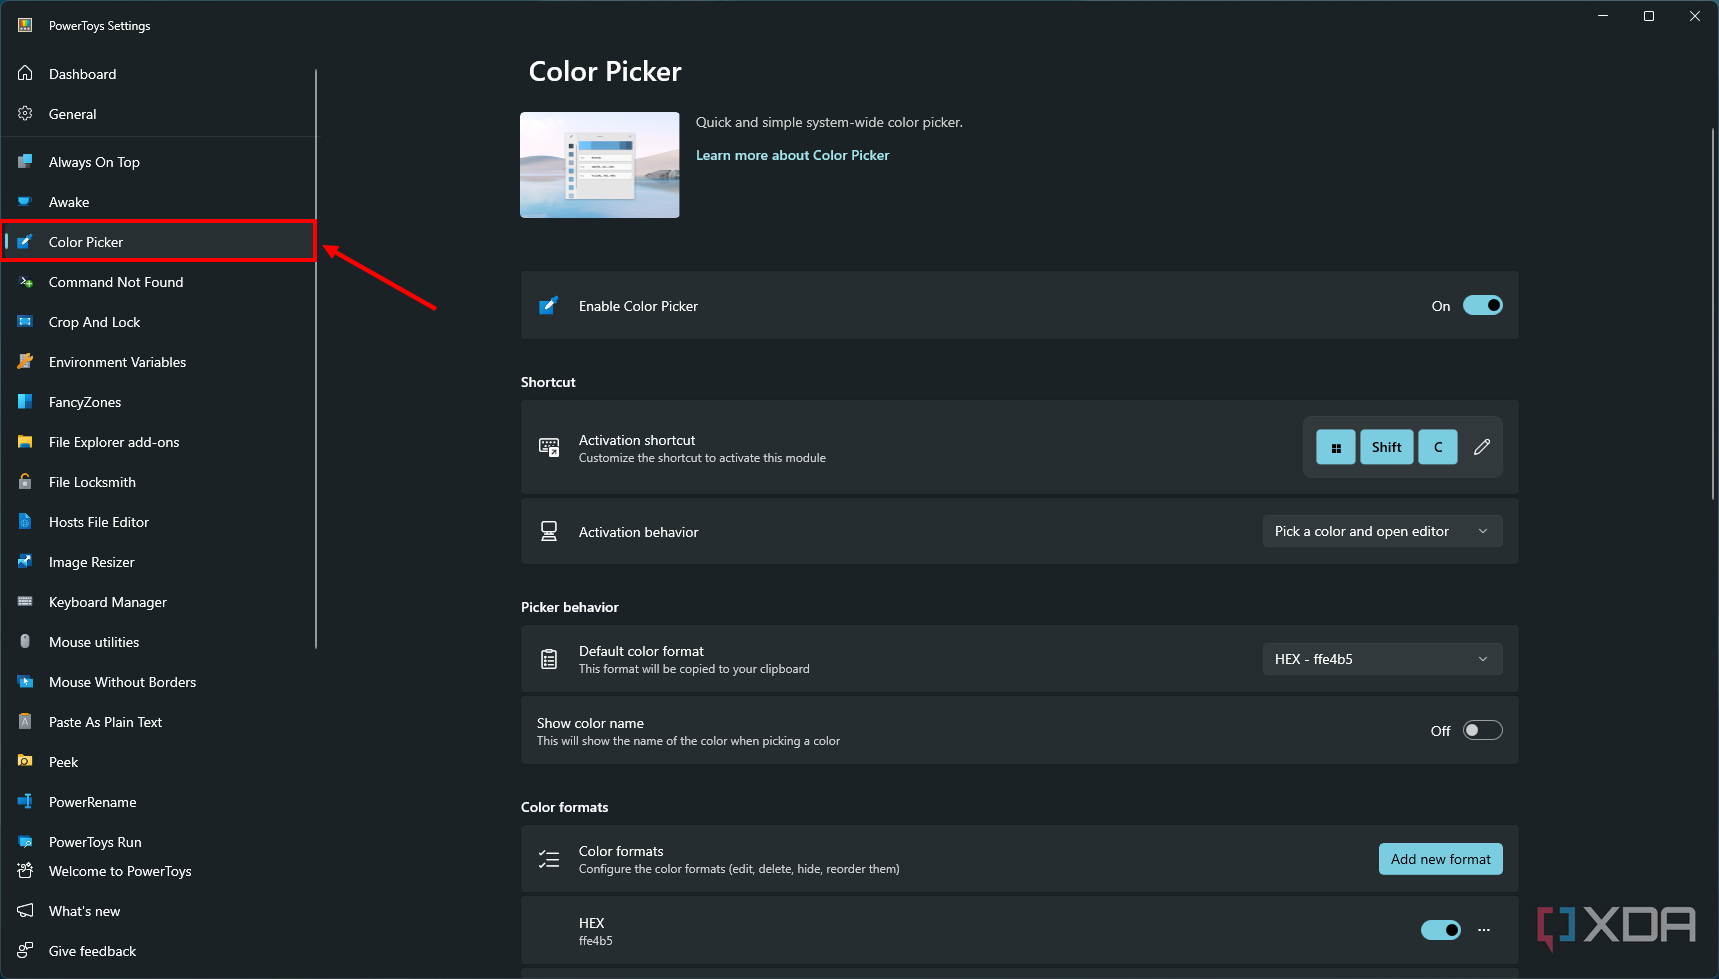 Screenshot of PowerToys with the Color Picker section highlighted